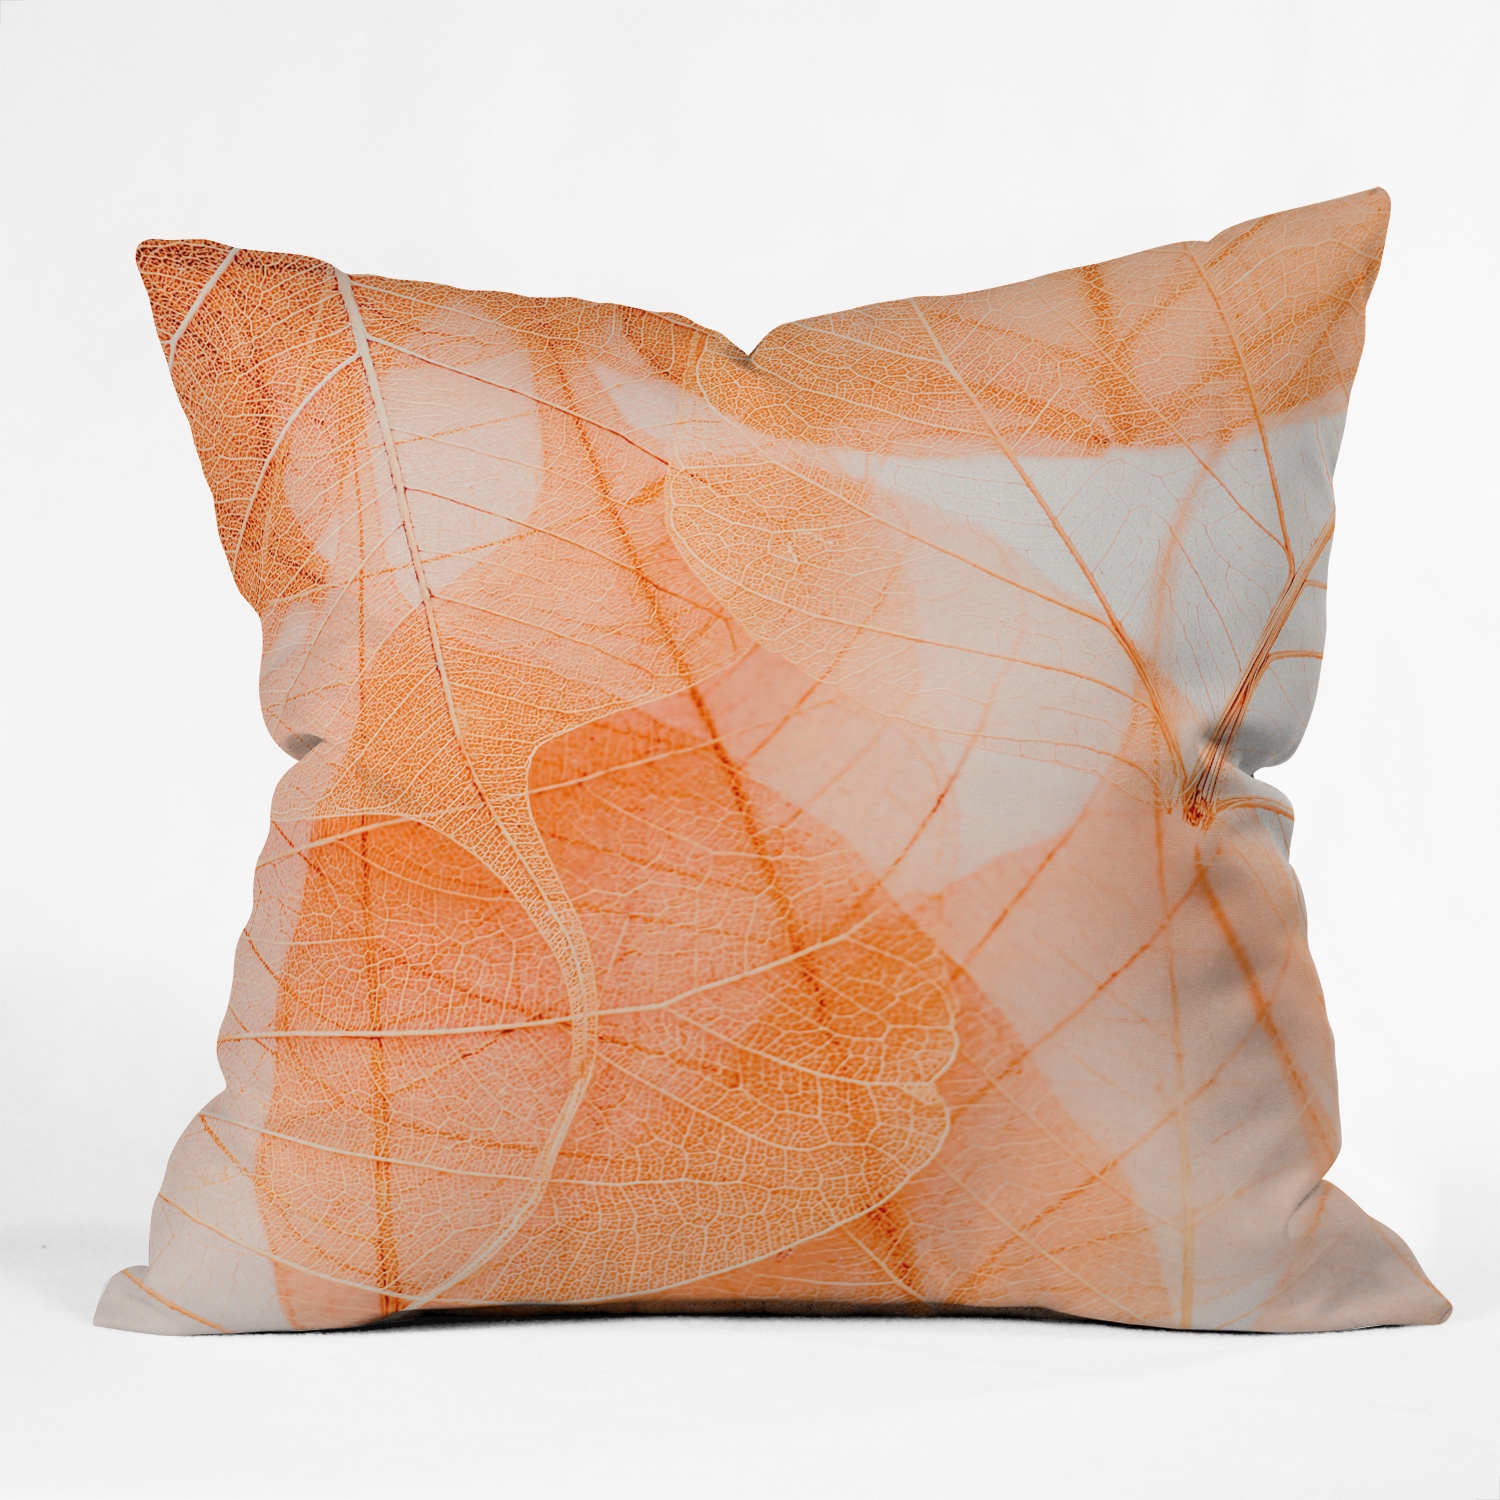 Orange Marmalade by Ingrid Beddoes - Outdoor Throw Pillow 18" x 18" - Image 1